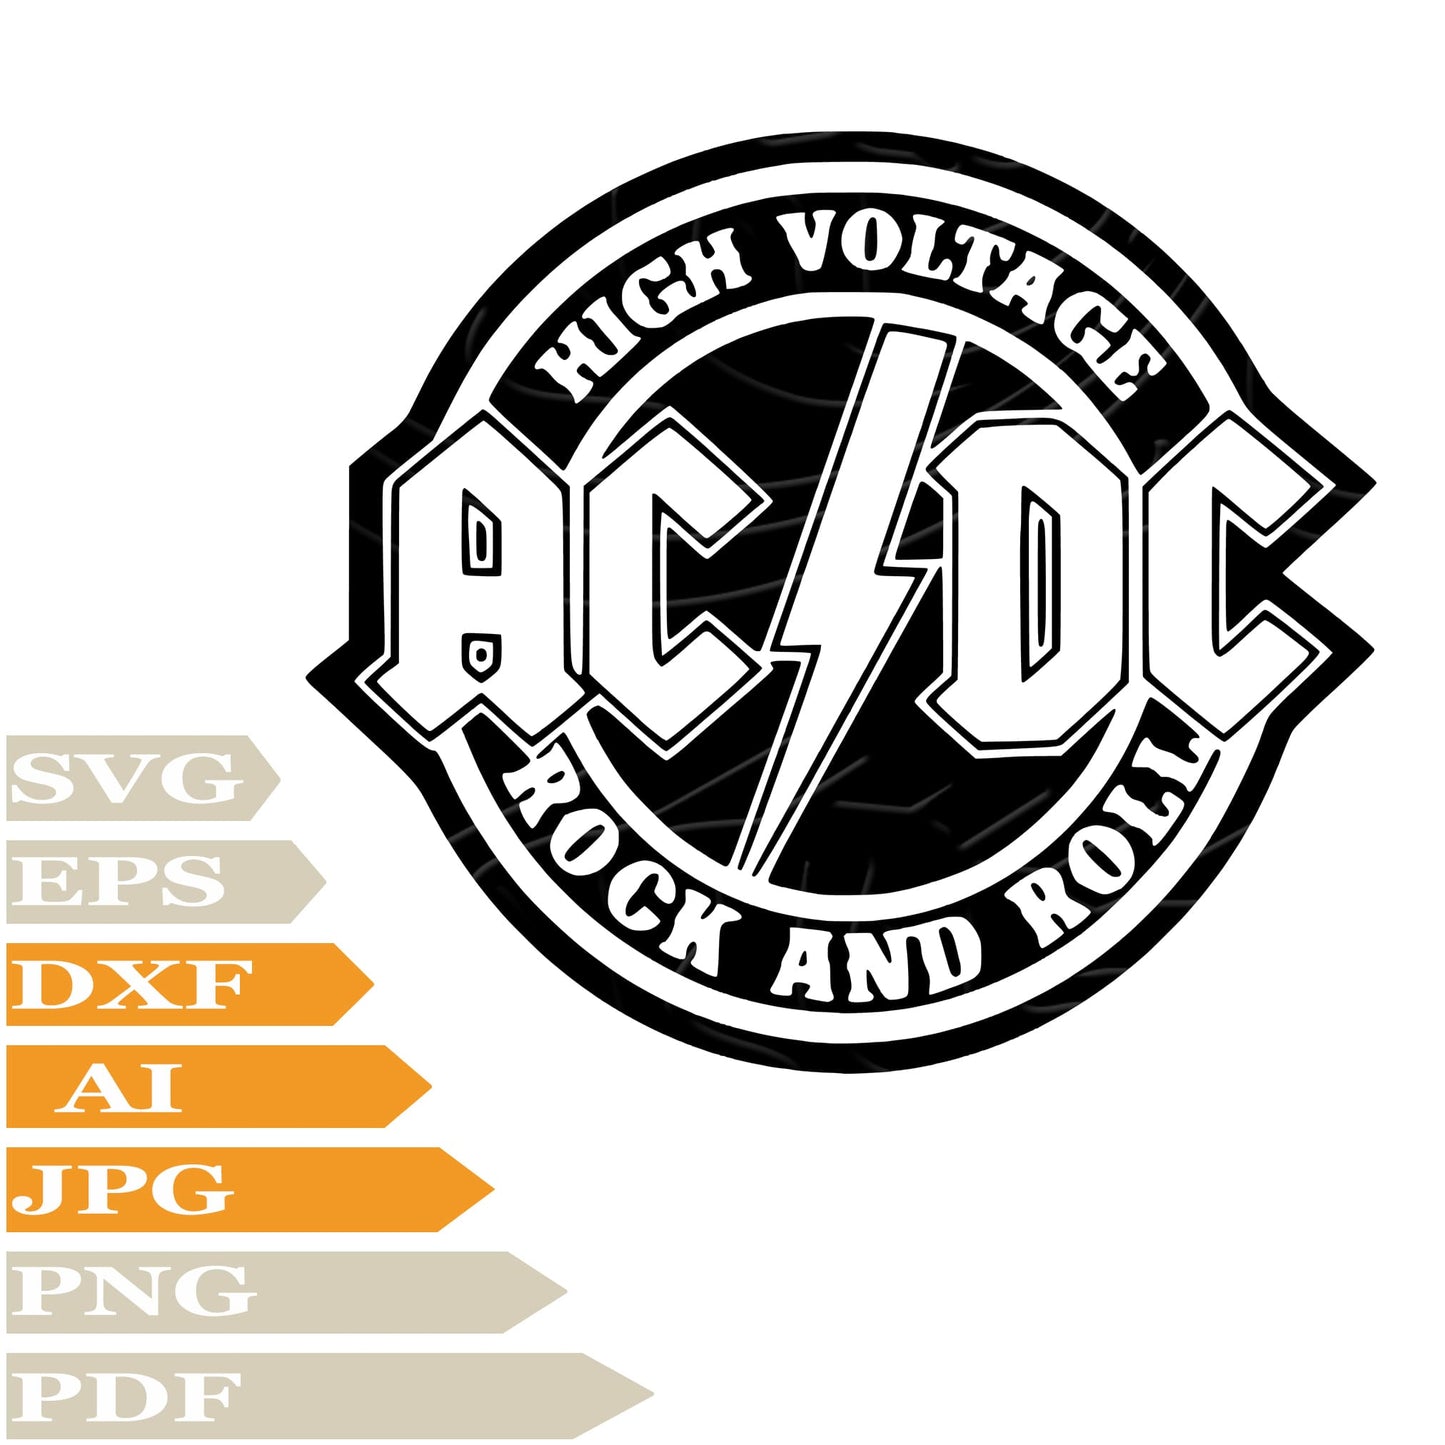 AC/DC SVG, AC/DC Rock Band SVG Design, AC/DC Logo Vector Graphics, AC/DC Logo For Cricut, For Tattoo, Clip Art, Cut File, T-Shirts, Silhouette, All Available